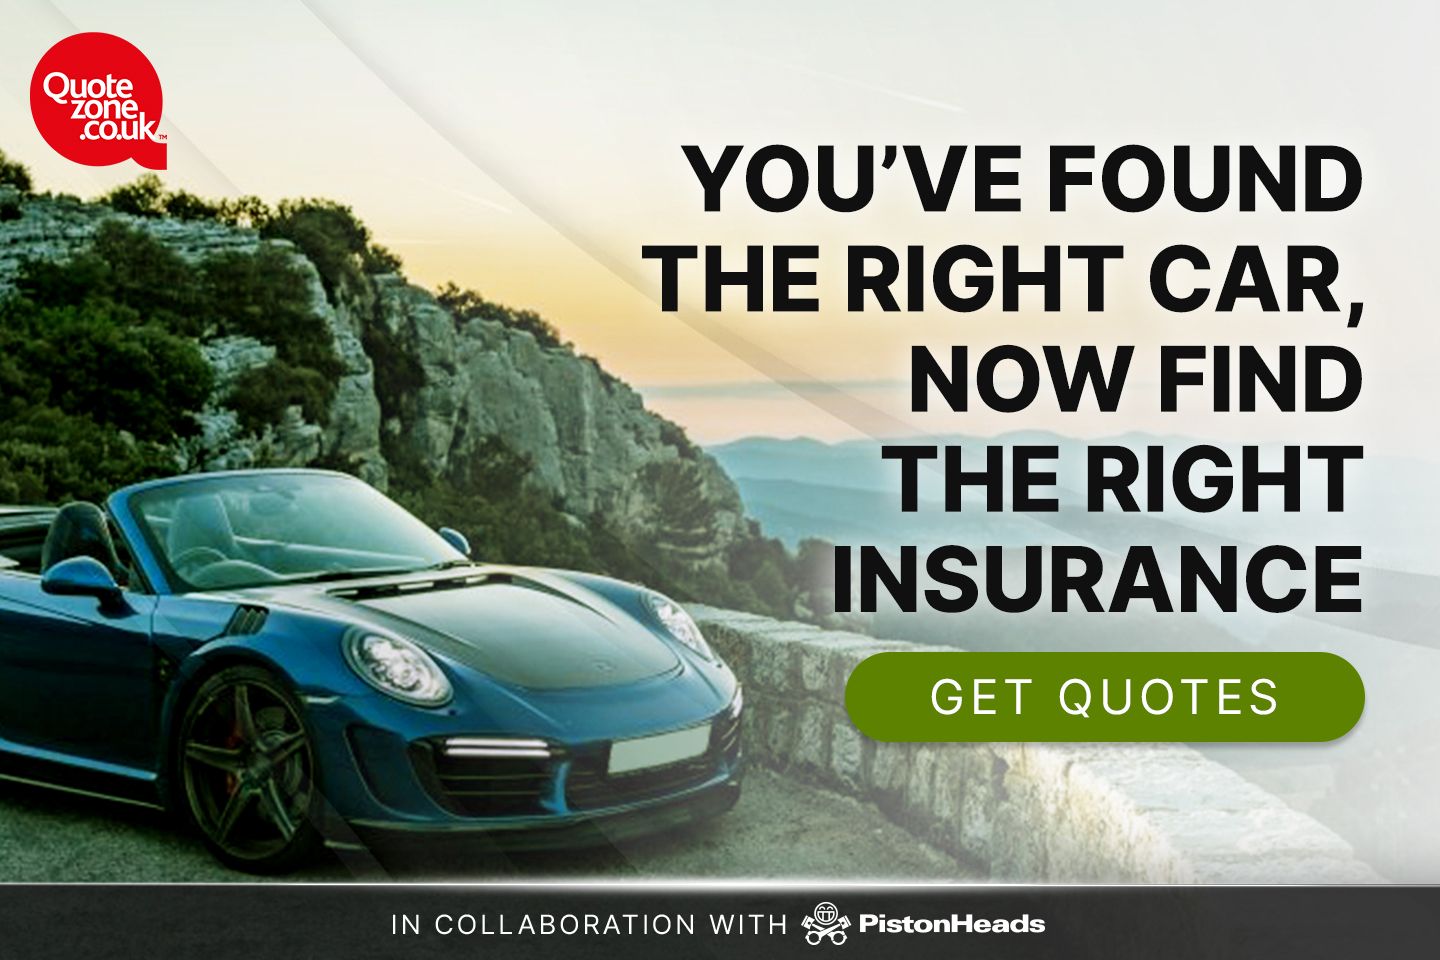  Where It's Easy to Compare Car Insurance Quotes